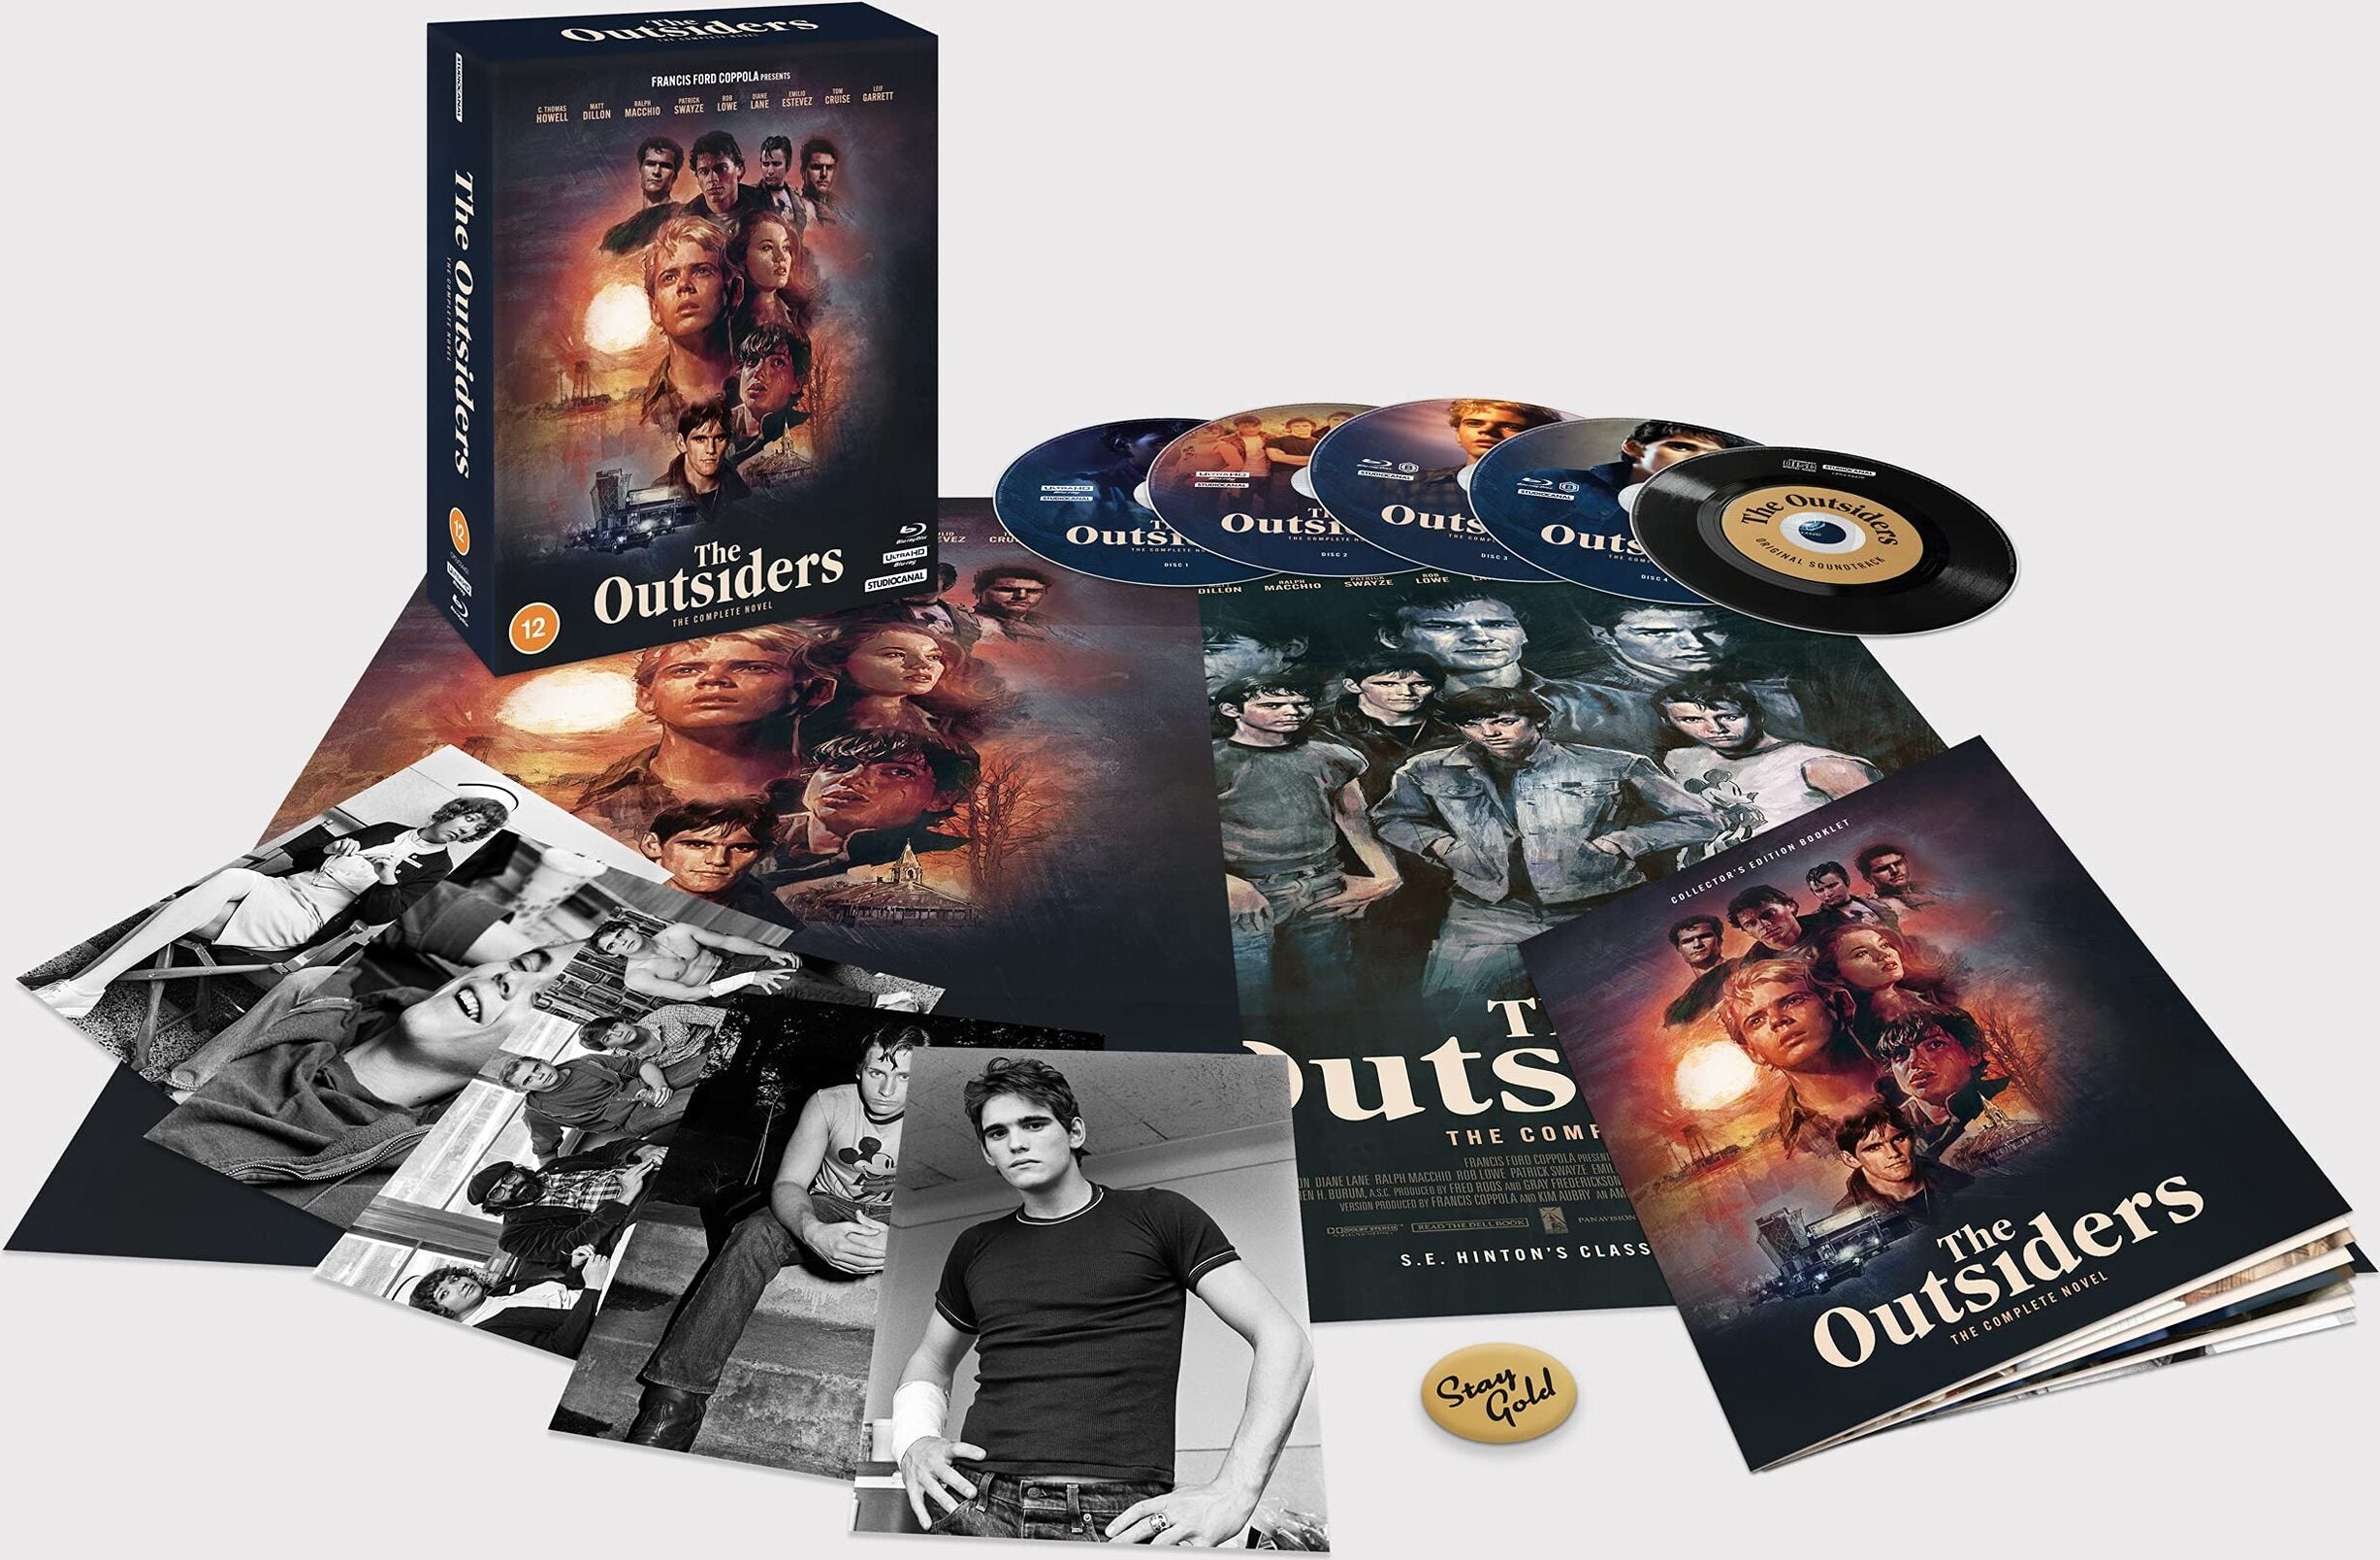 The Outsiders: Complete Novel 9Limited Edition - Region Free/b Import) 4K Uhd/blu-Ray/cd Ultra Hd